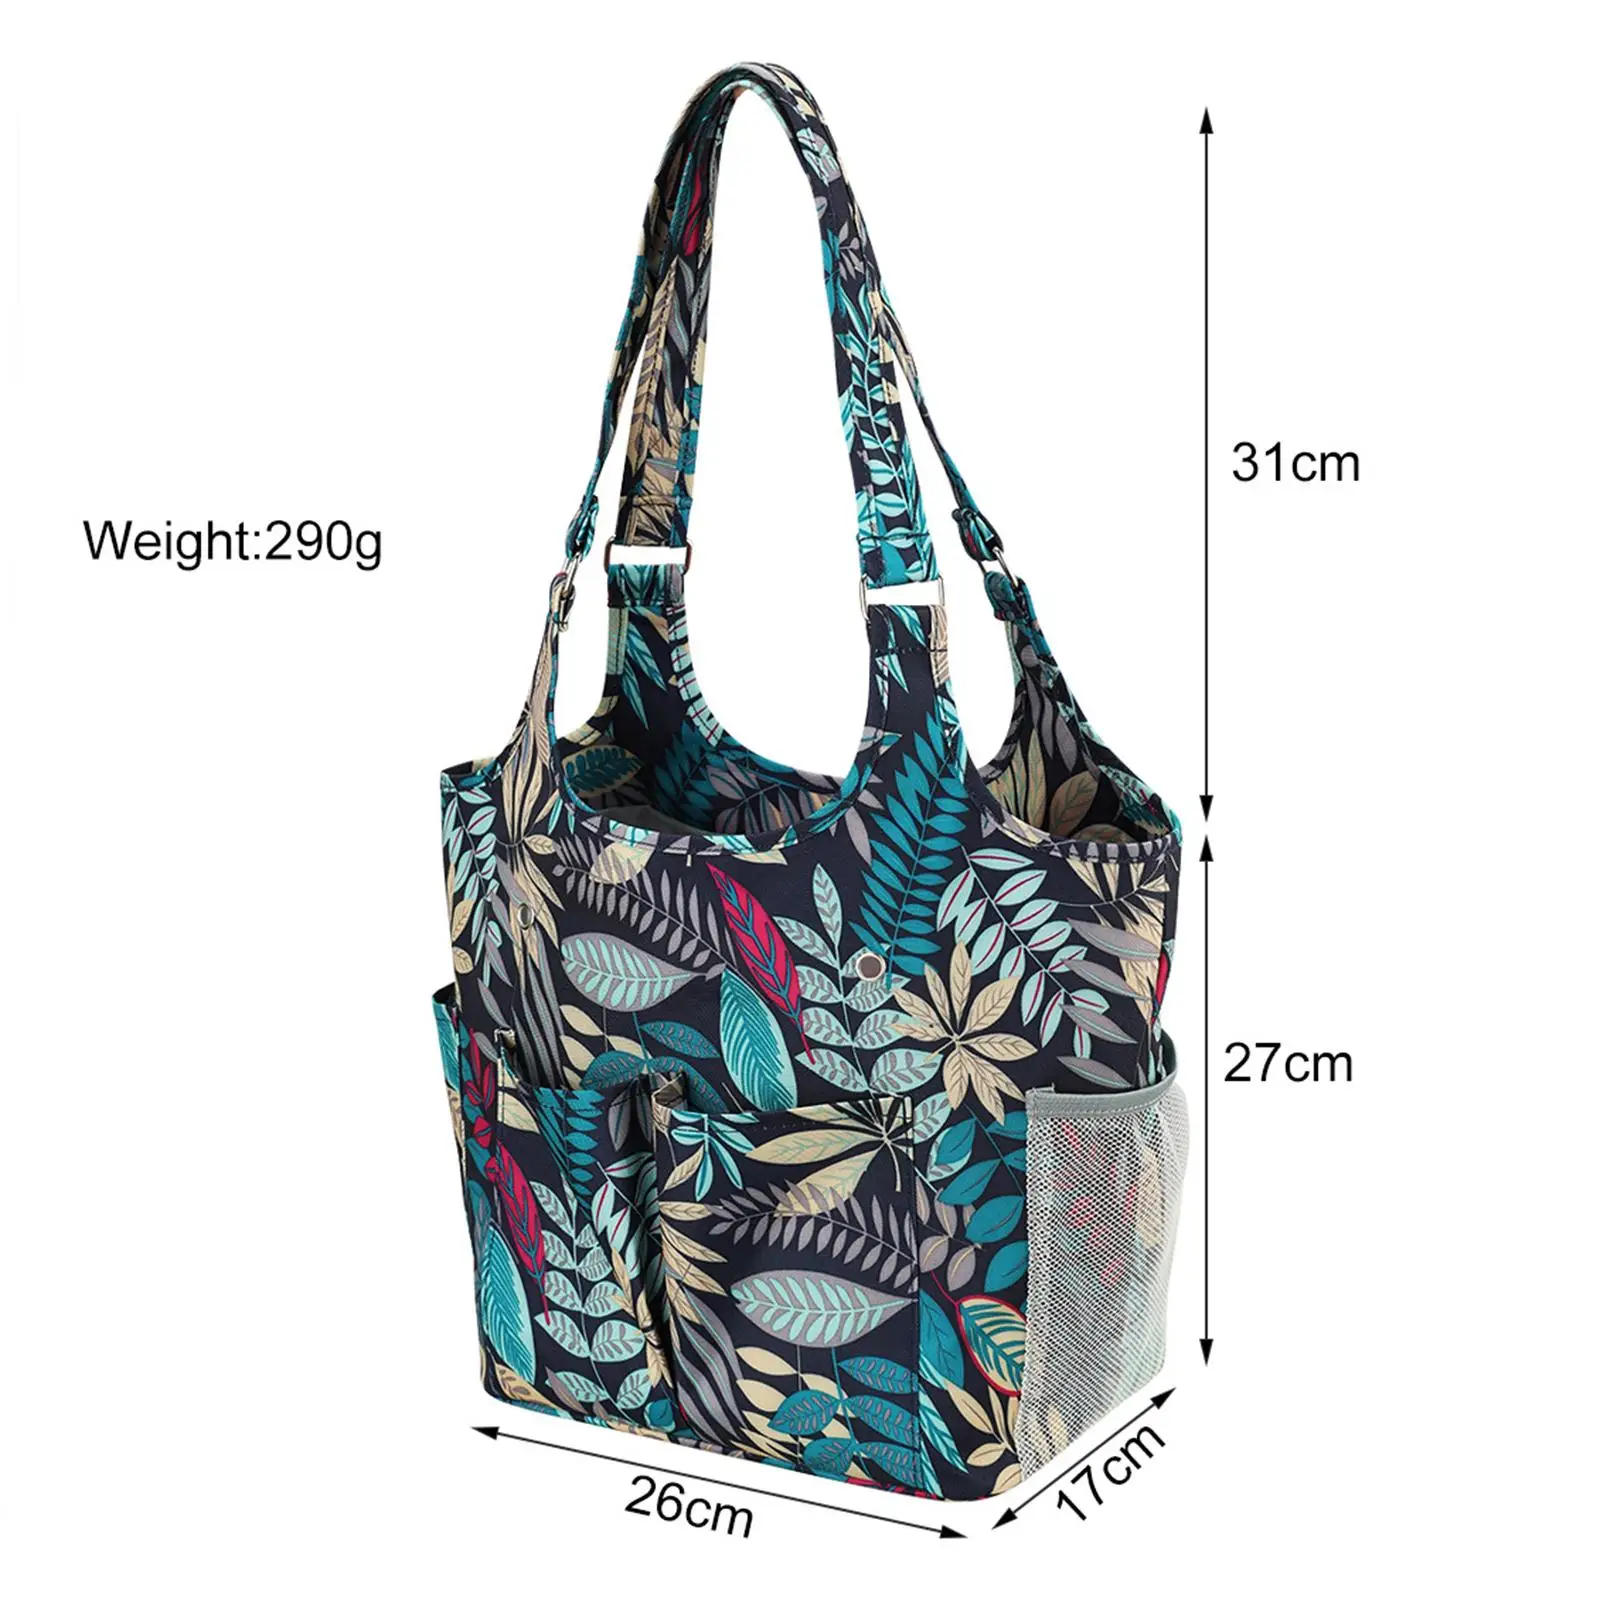 Knitting Tote Bag High Capacity Lightweight Large Large Capacity Yarn Storage Tote Bag for Hook Cross Stitch Craft Crochet Hook